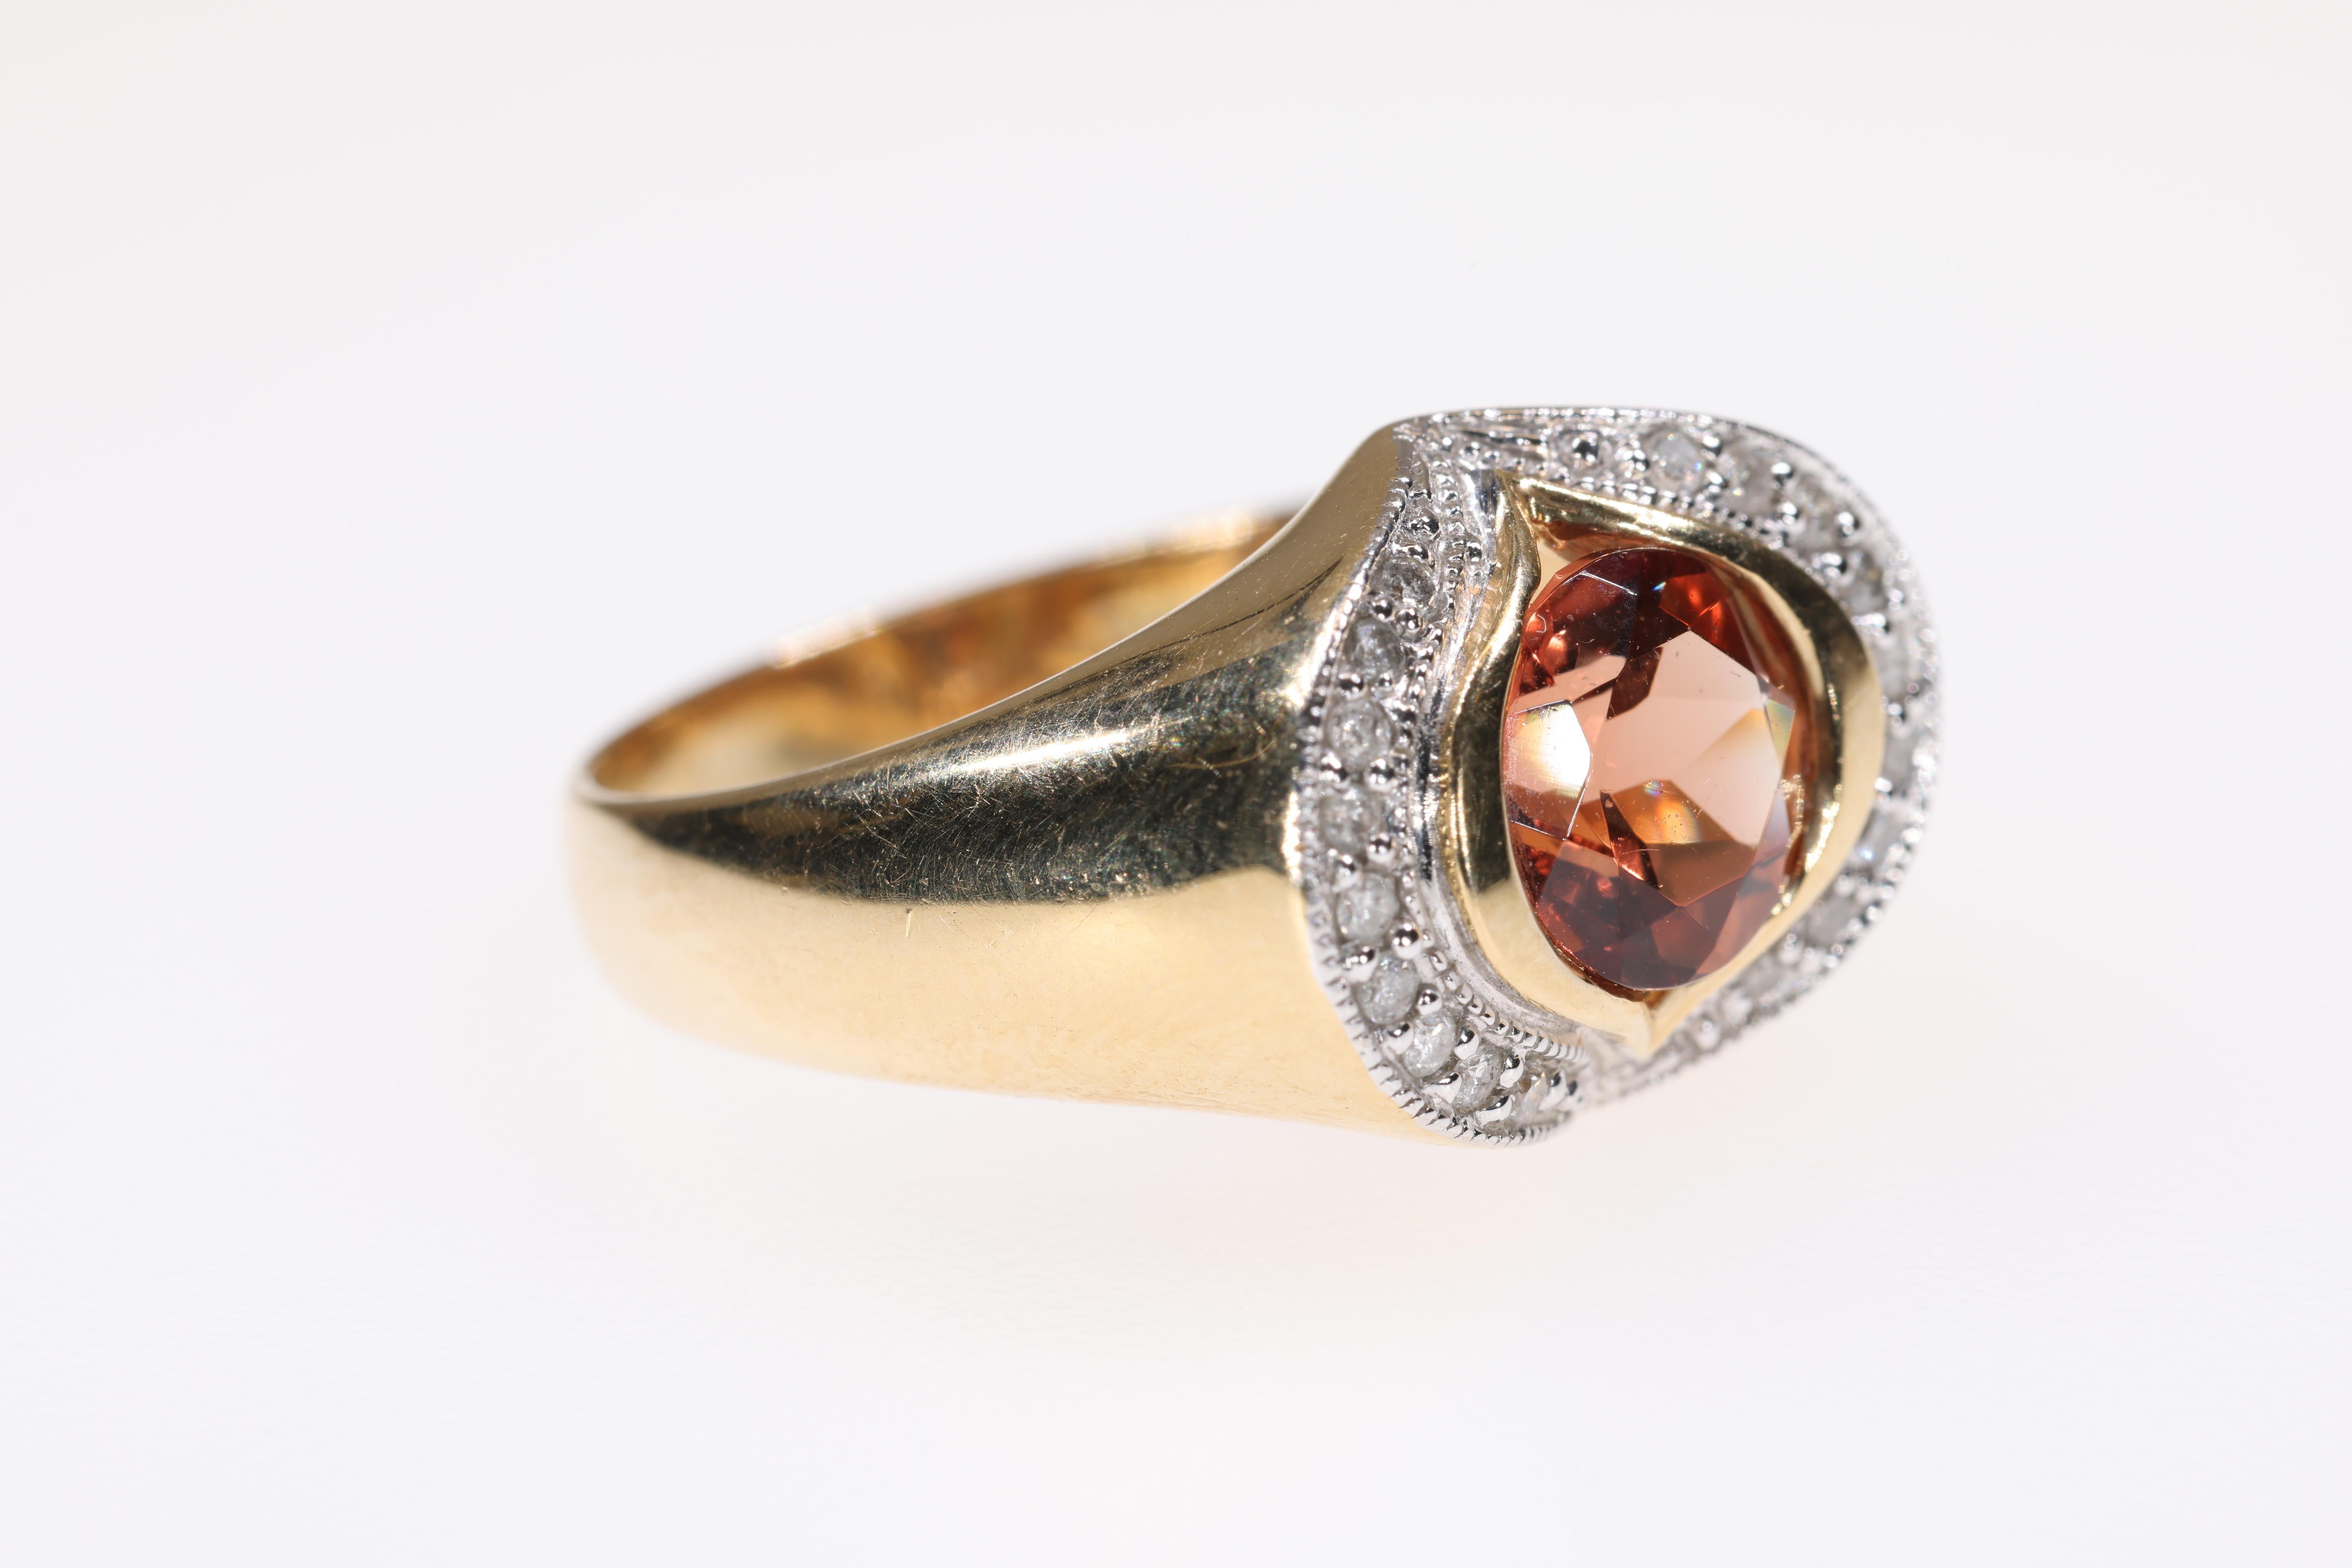 This is a beautiful fashion ring that has an Andesine Feldspar center stone of deep rich color. The ring is made from 14K yellow and white gold and has 20 accent diamonds.